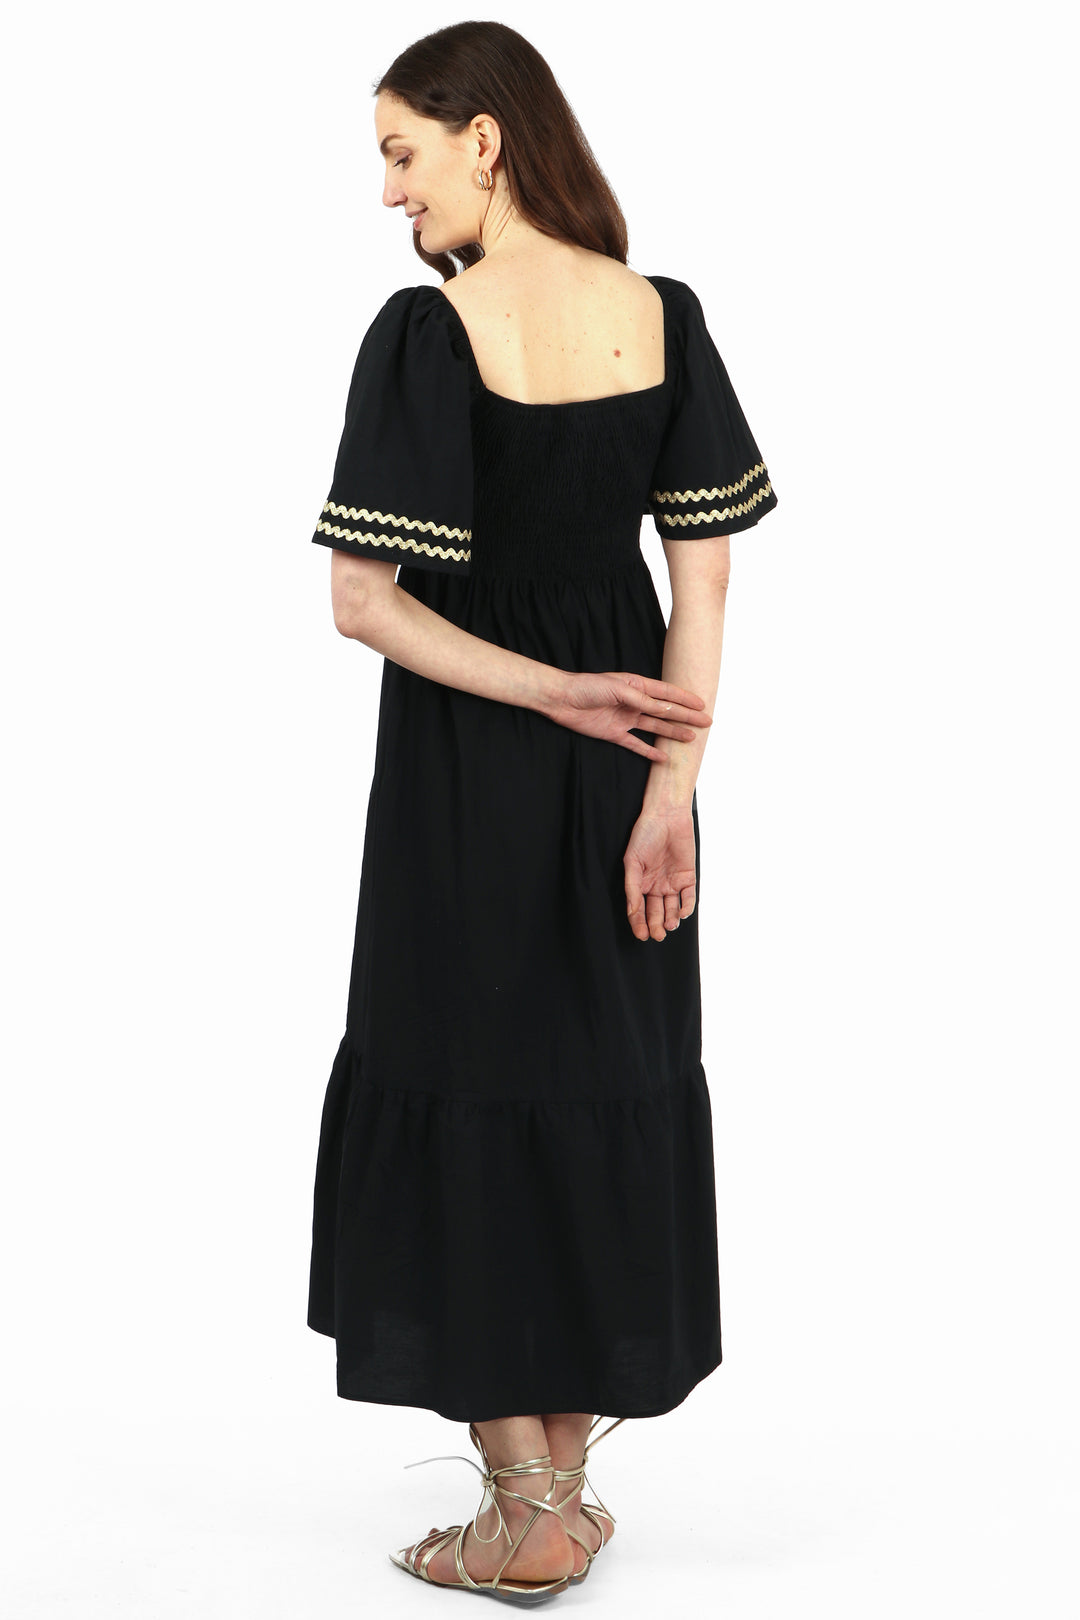 model showing the back of the dress, showing the square neck and gold trim on the sleeves